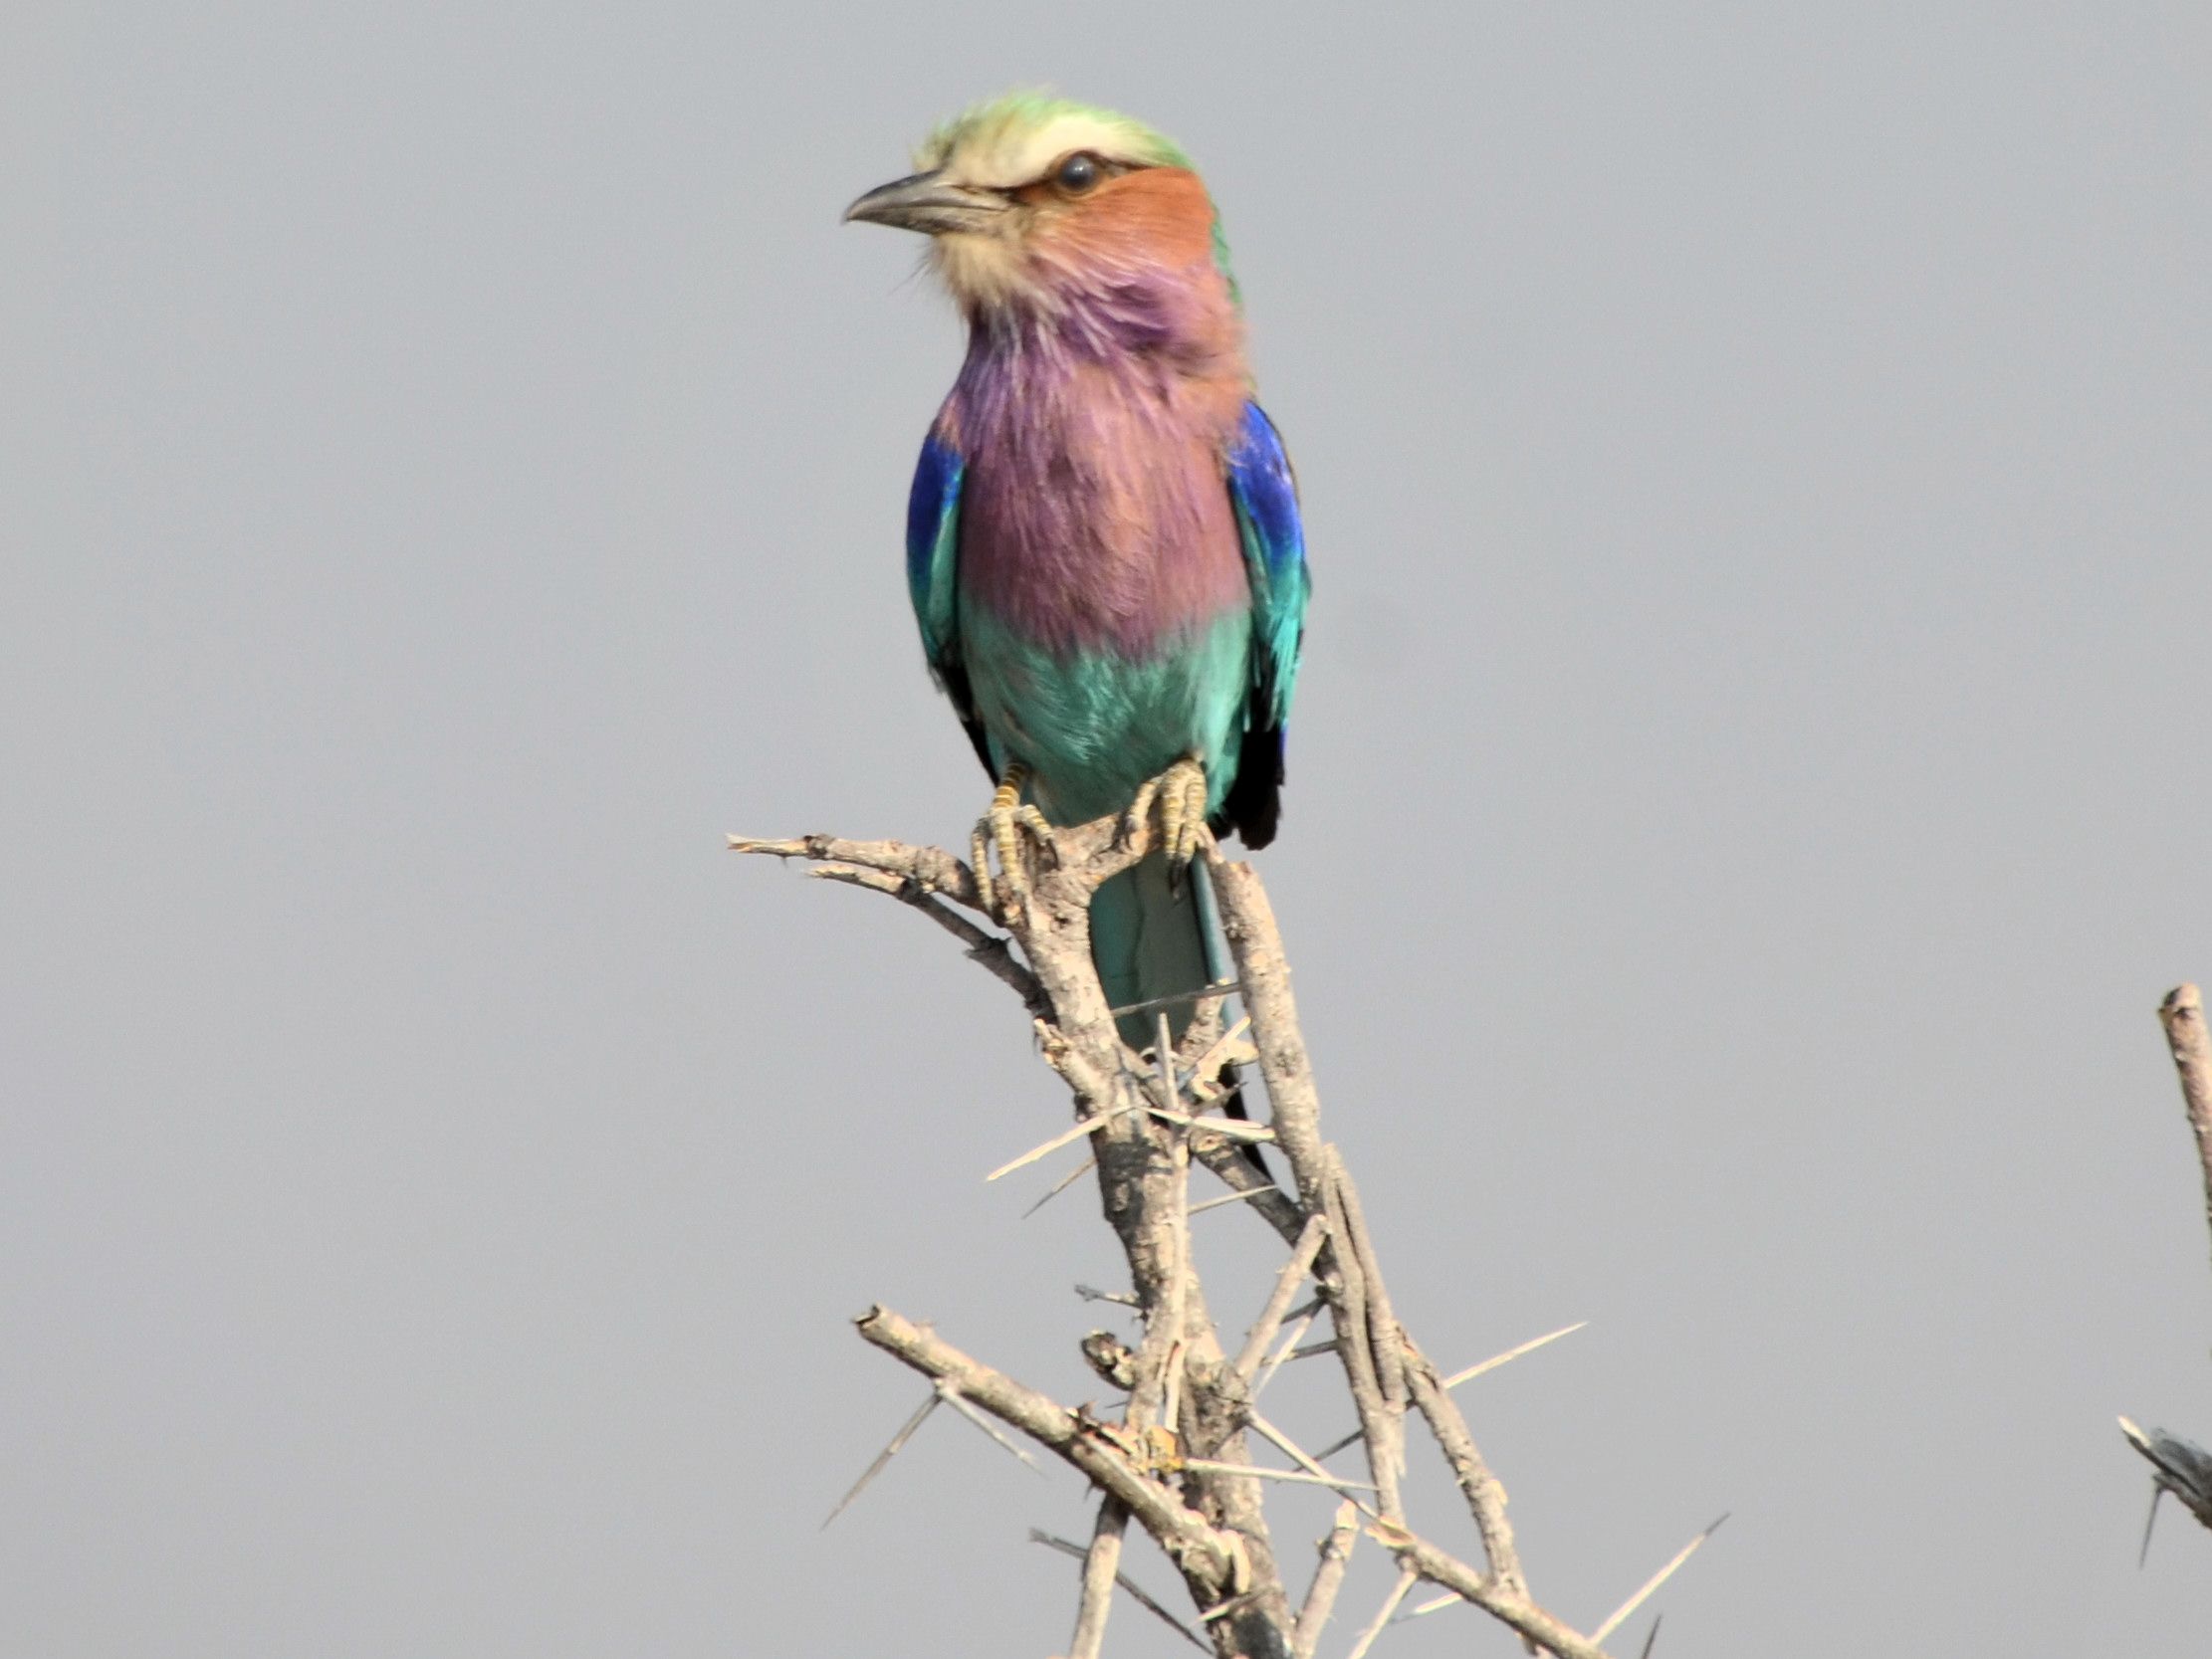 Click picture to see more Lilac-breasted Rollers.